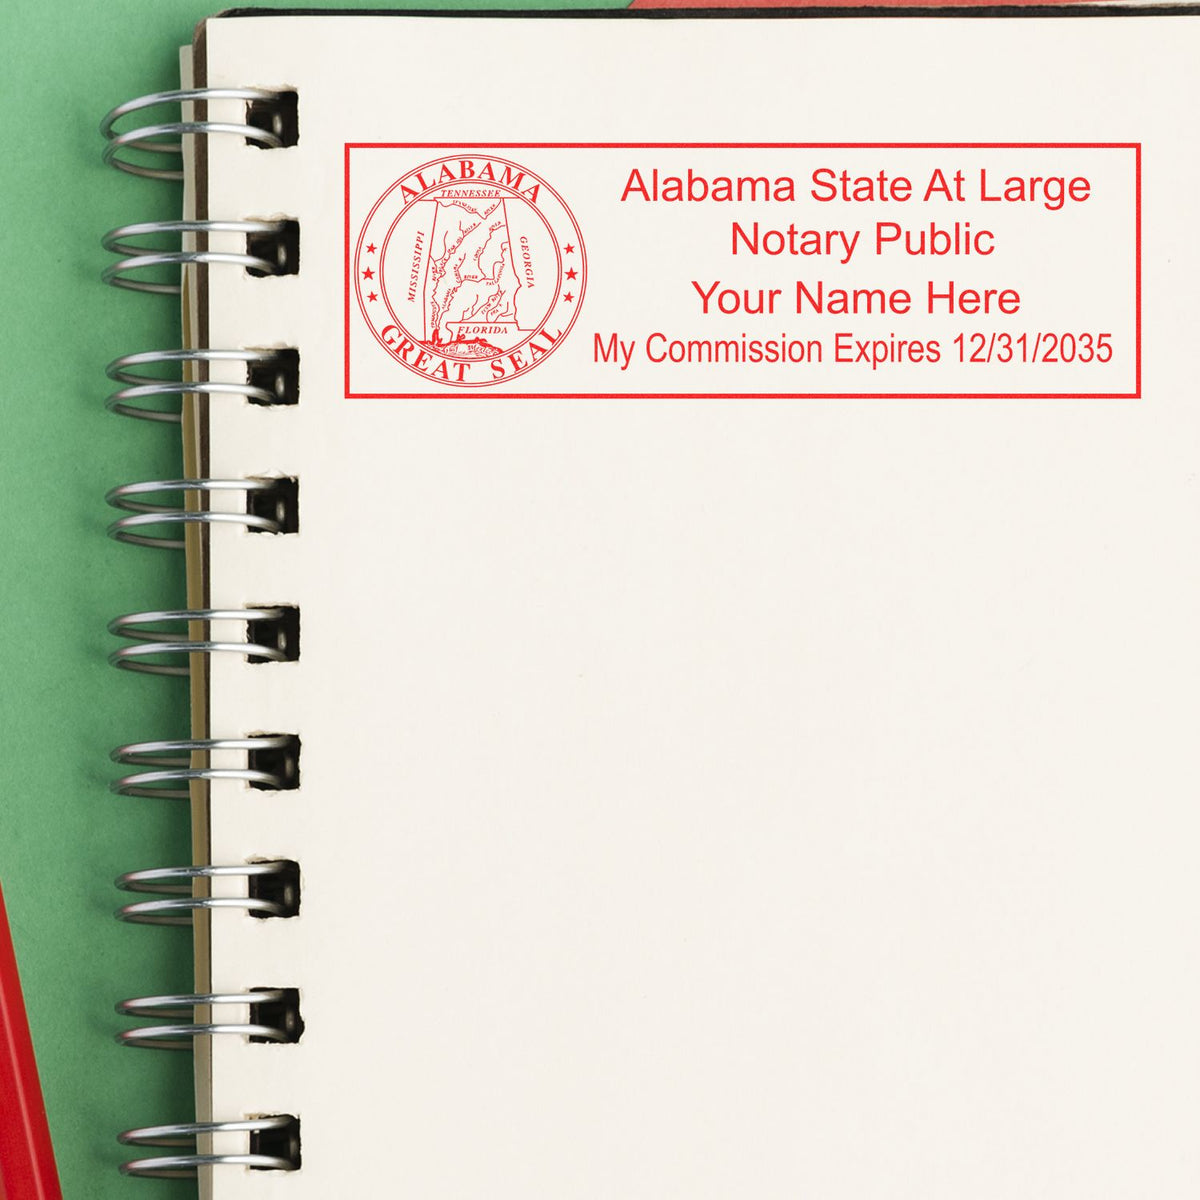 Another Example of a stamped impression of the Super Slim Alabama Notary Public Stamp on a piece of office paper.